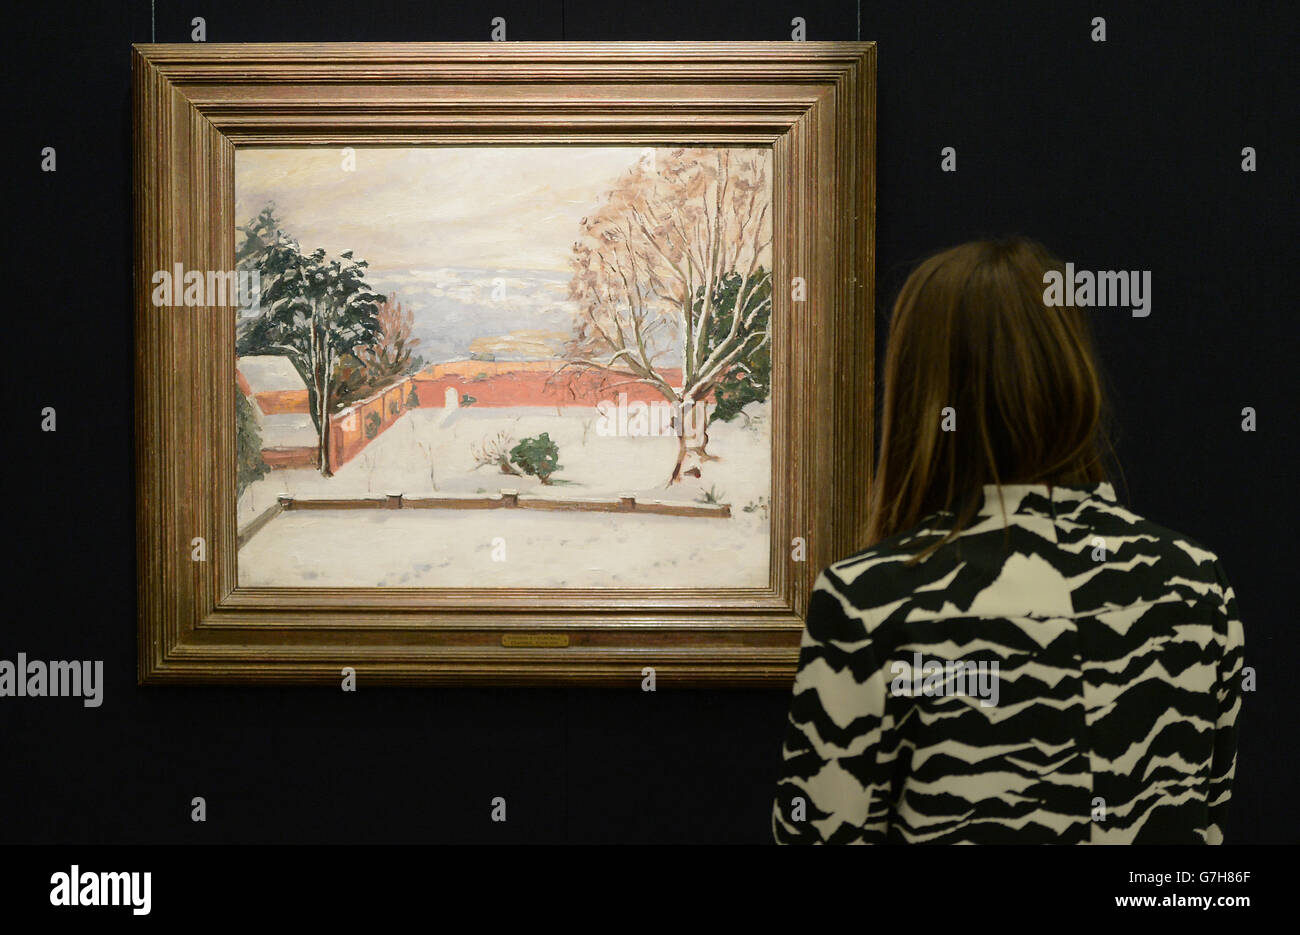 A woman views The Weald of Kent Under Snow by Winston Churchill during the press viewing of Daughter of History, Mary Soames and the Legacy of Churchill at Sotheby's auction house, London. PRESS ASSOCIATION Photo Picture date: Friday December 12, 2014. Charting Lady Soames' life, the collection chronicles historical moments of the 20th Century, while also presenting an intimate portrait of Winston Churchill and his family. Photo credit should read: Anthony Devlin/PA Wire Stock Photo